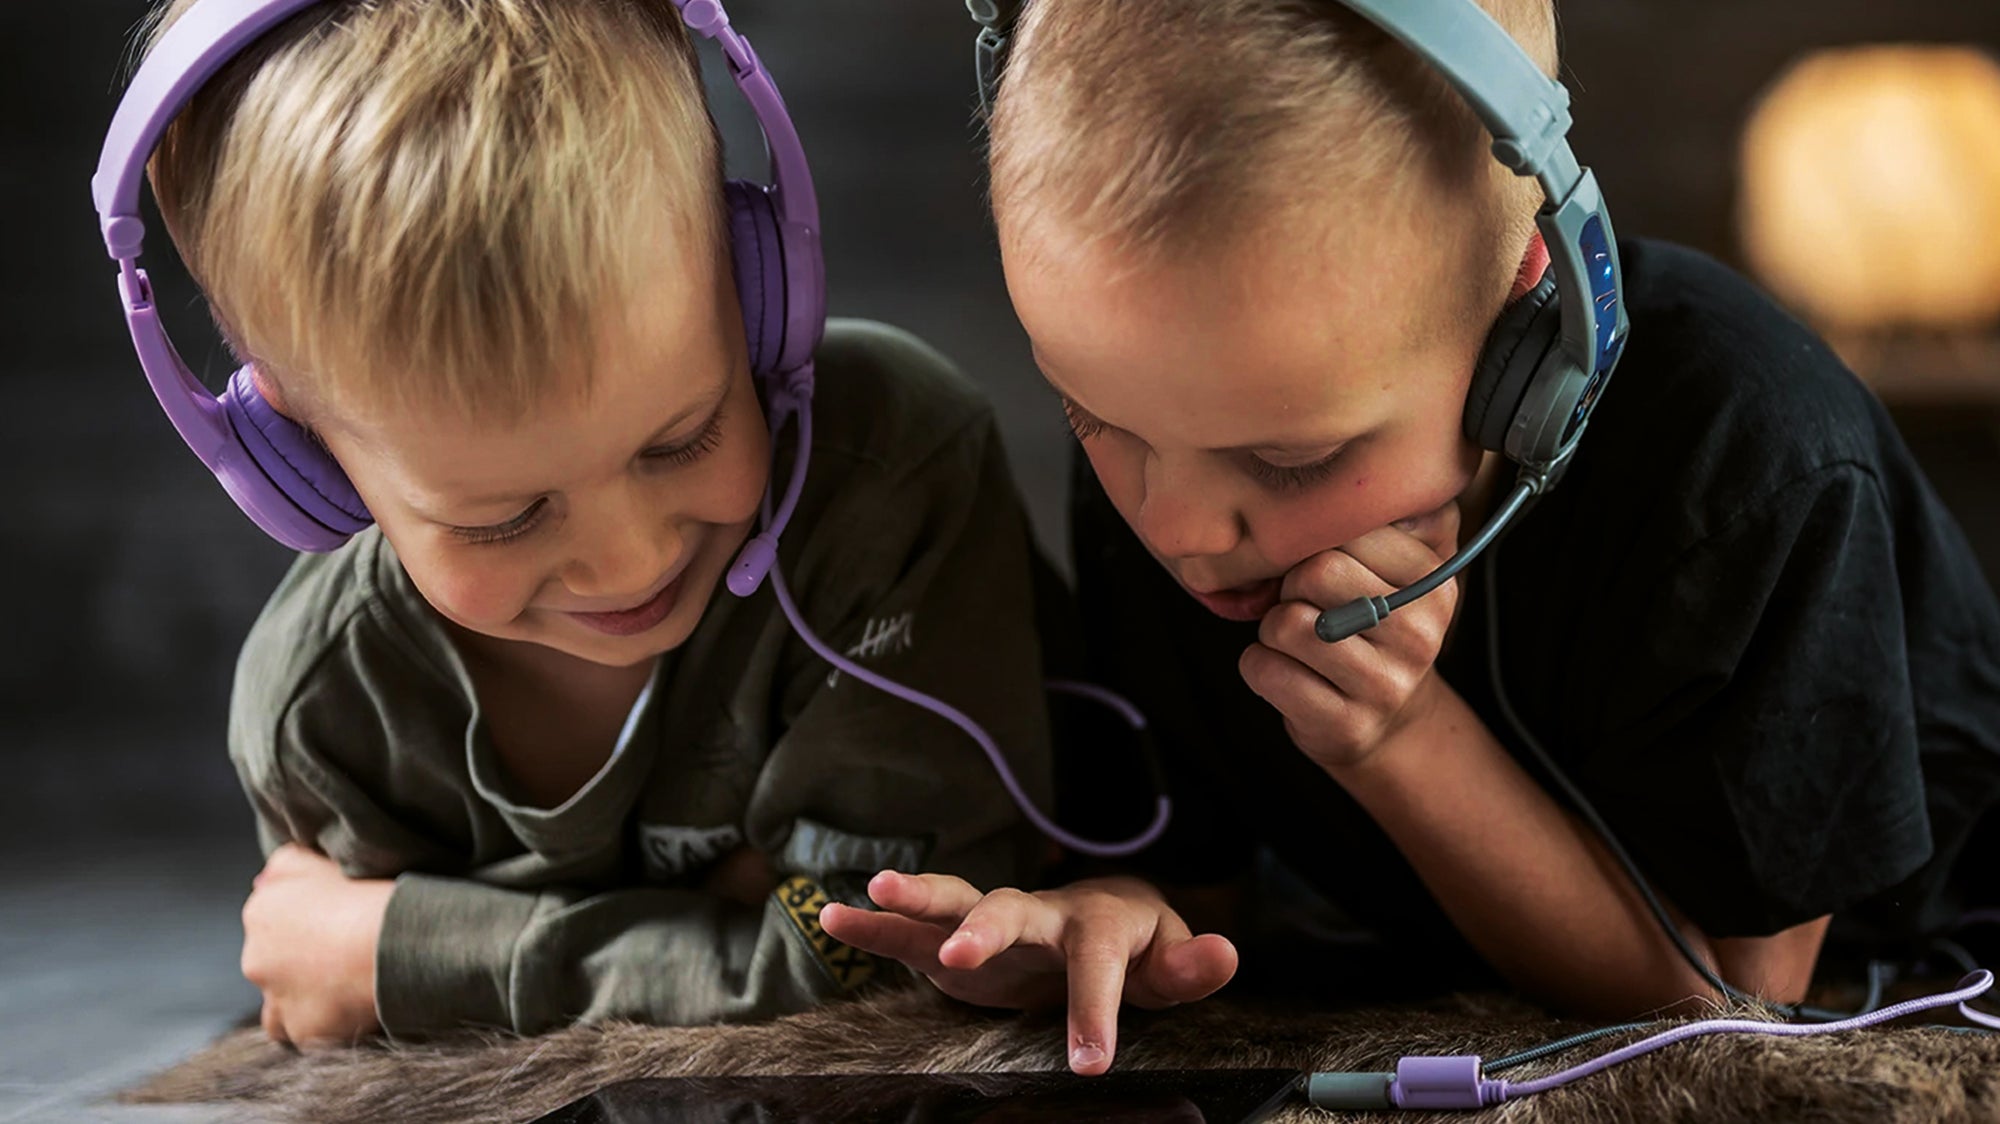 Are you sure your kids are using the right headphones?